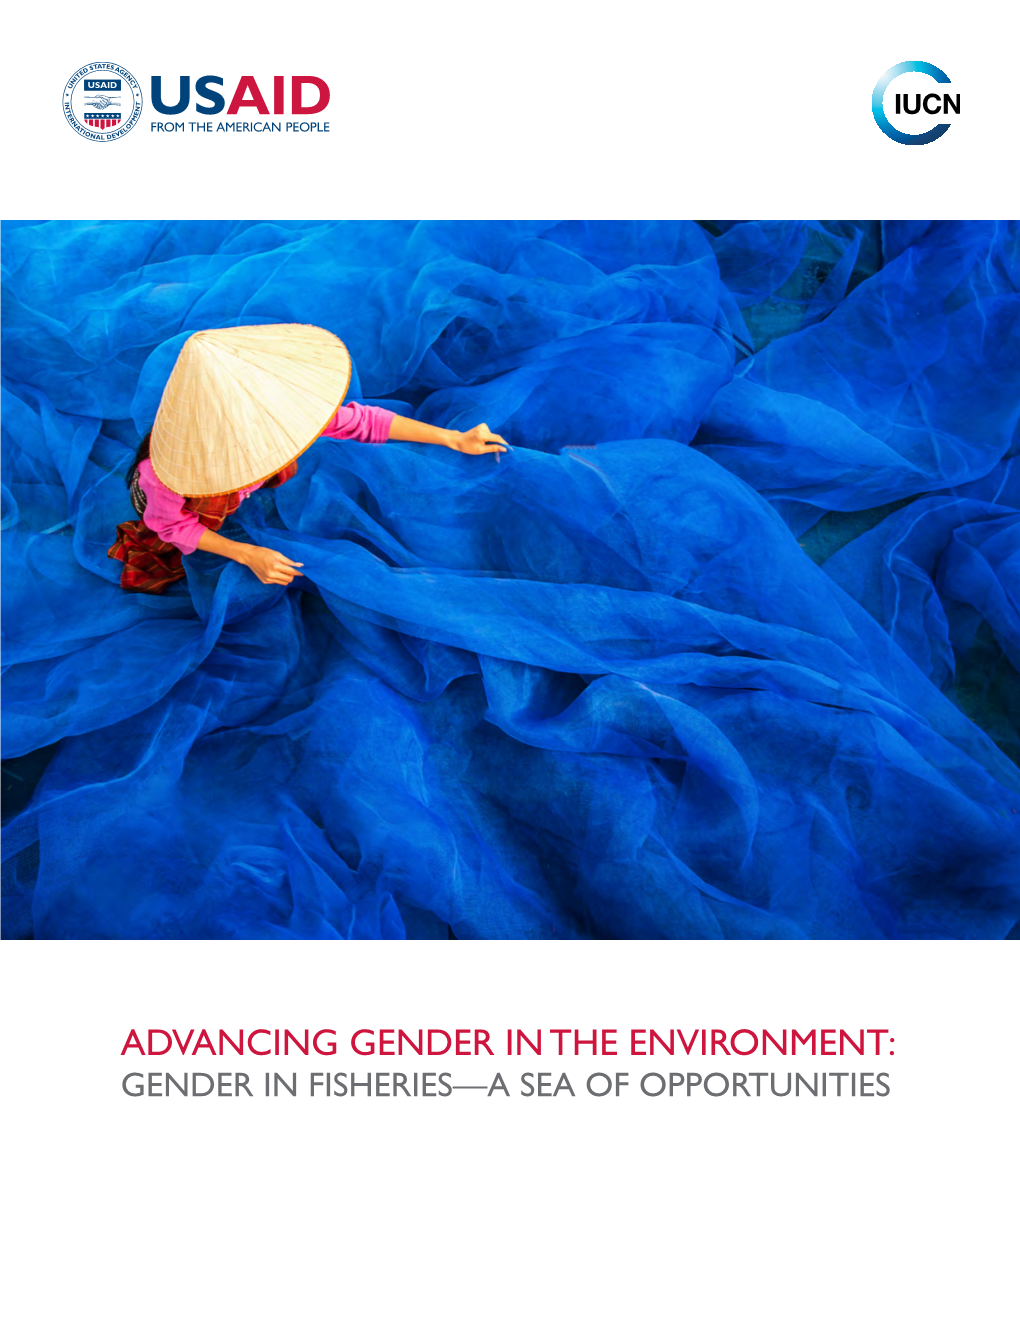 GENDER in FISHERIES—A SEA of OPPORTUNITIES Published by International Union for Conservation of Nature